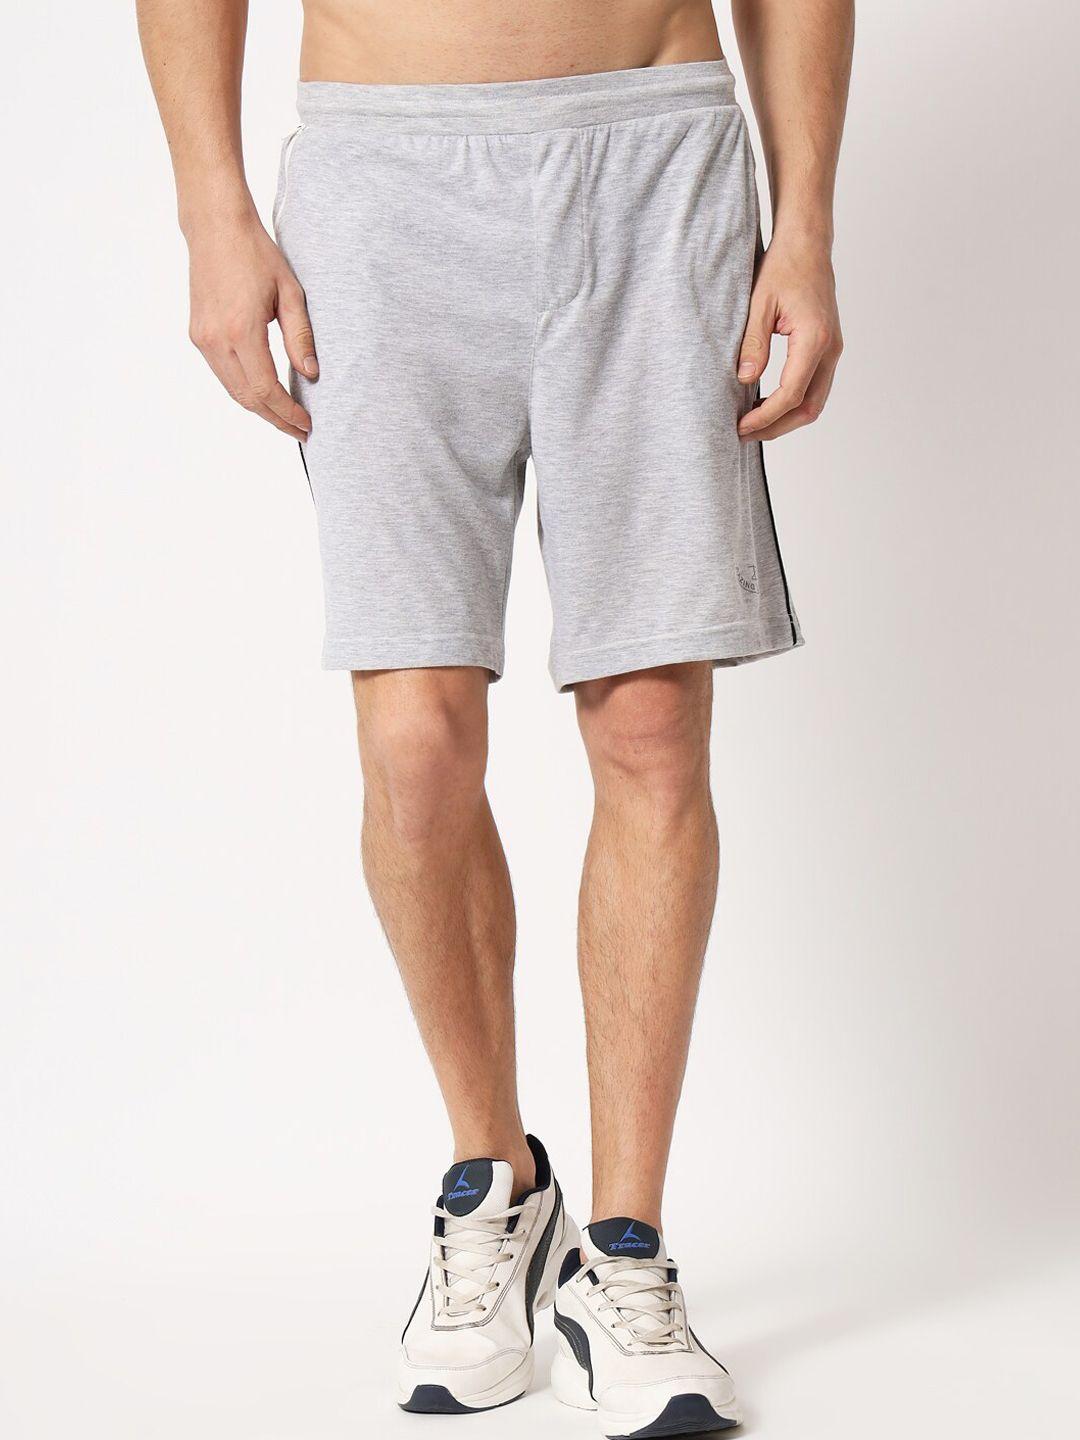 aazing-london-men-grey-solid-cotton-sports-shorts